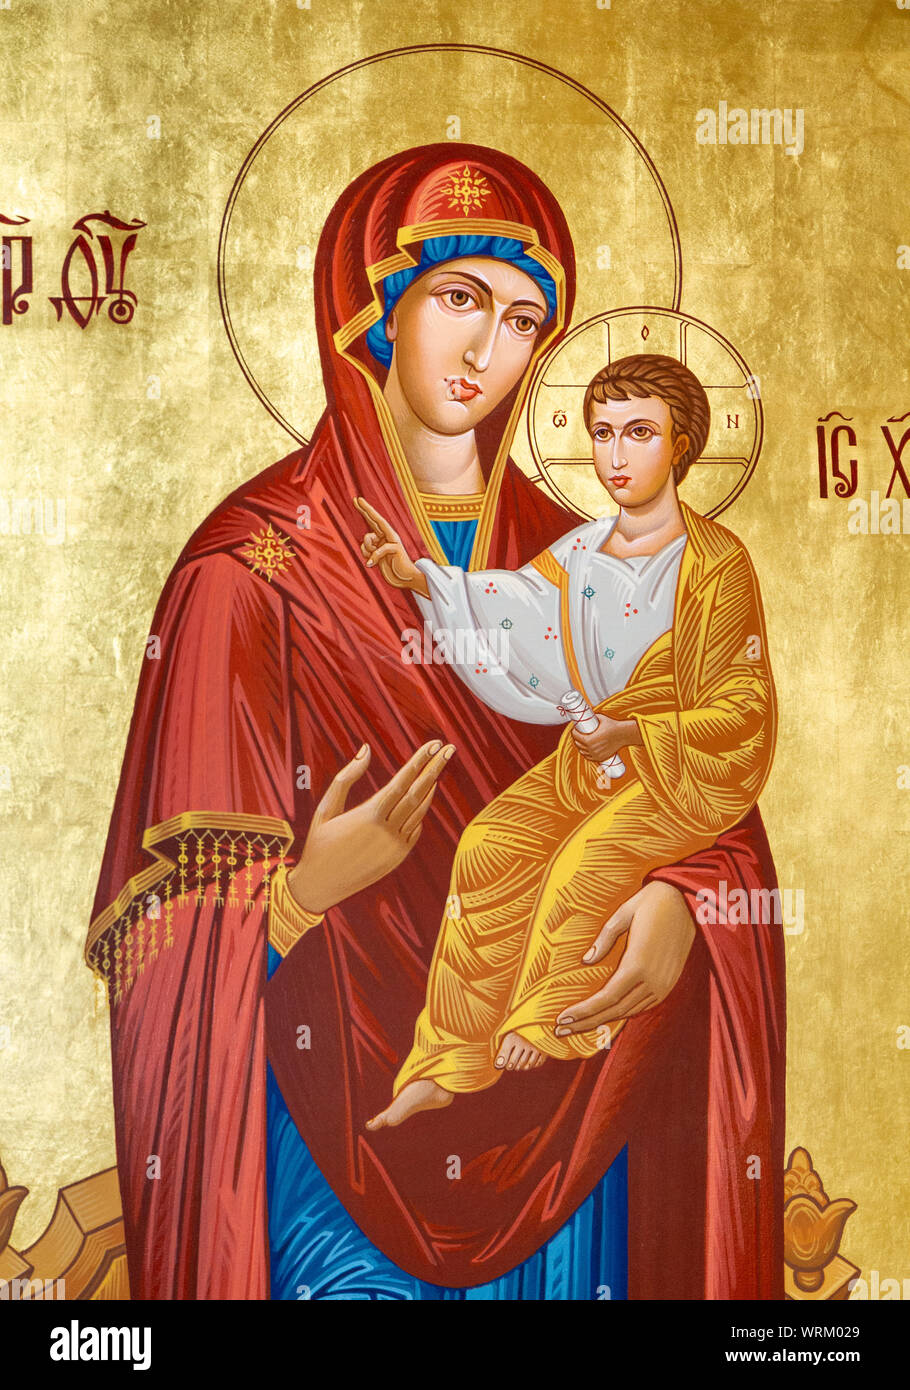 The icon of the Virgin Hodegetria (Our Lady of the Way). Part of the Iconostasis in the Greek Catholic church of Saint Elijah. Stock Photo